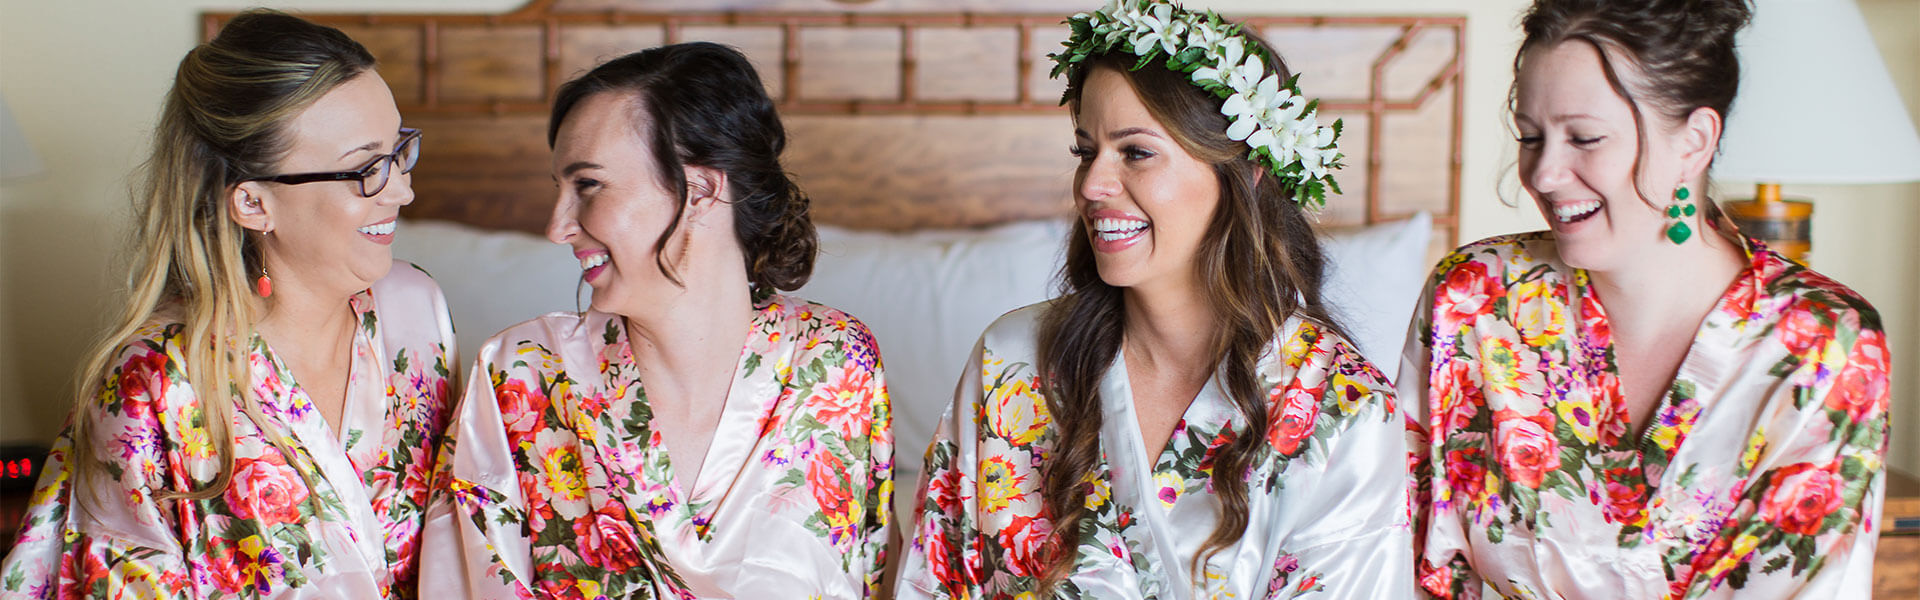 bride and her bridesmaids in a room with floral robes